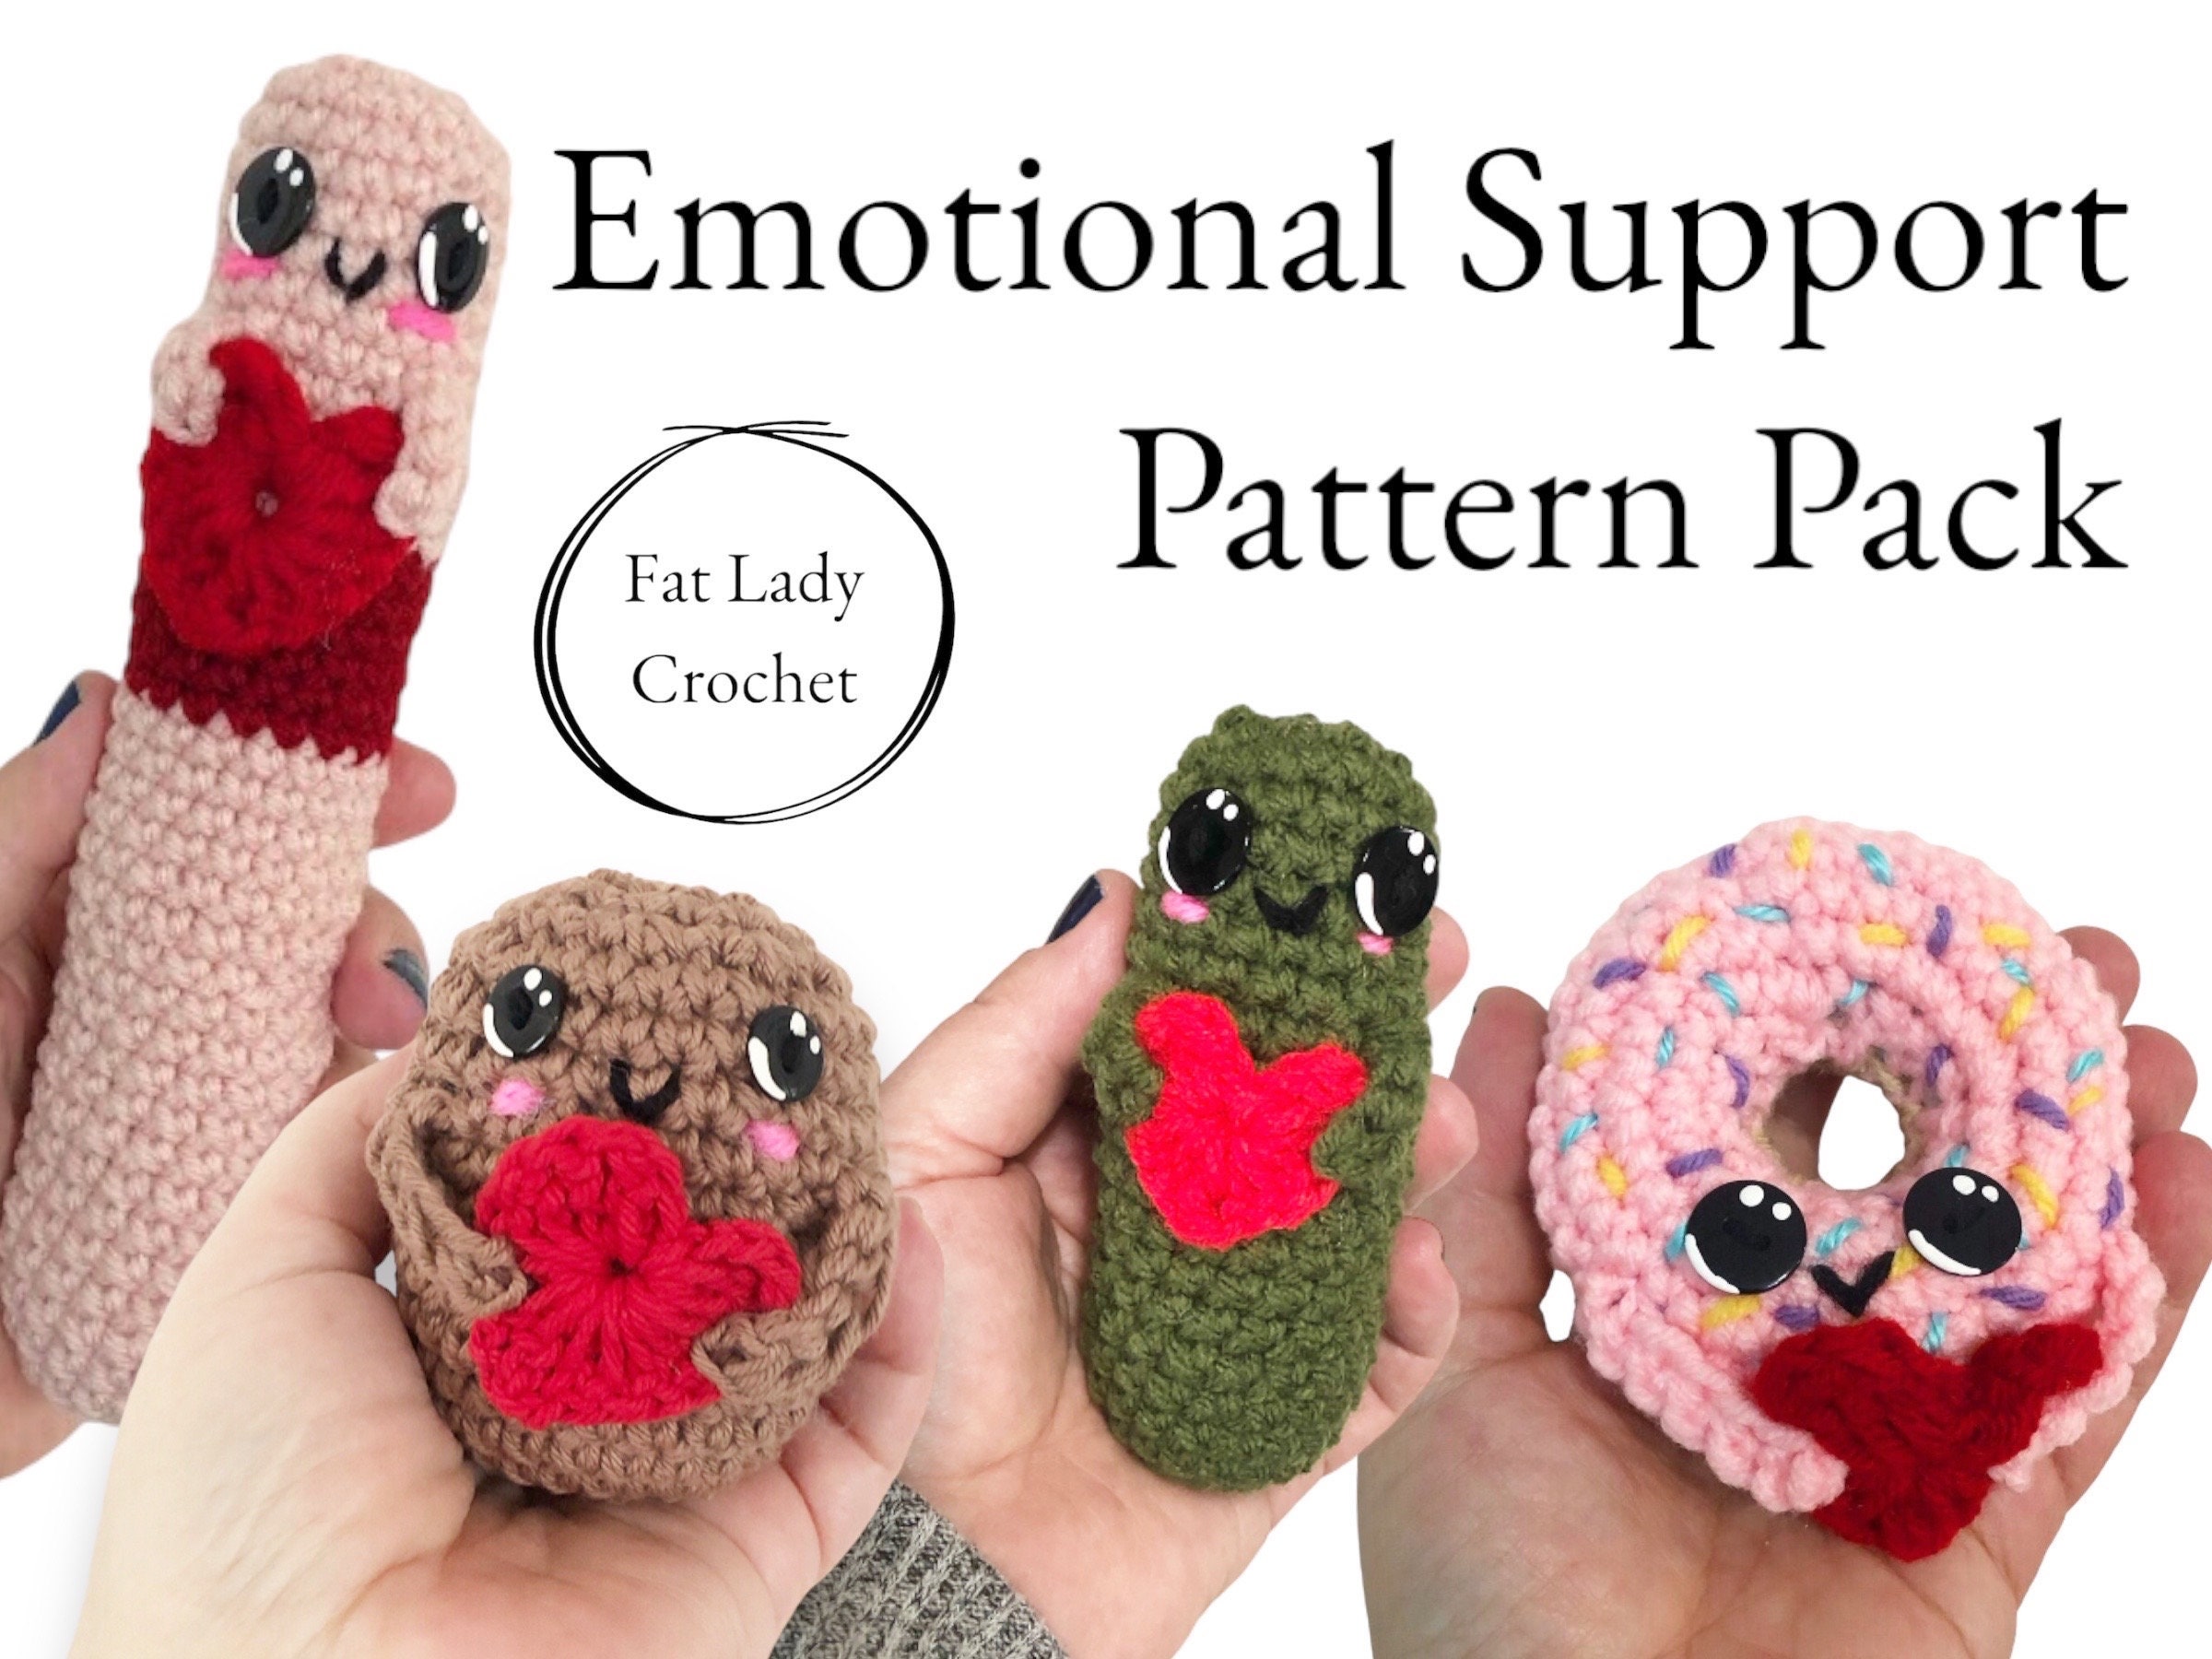 Webekittys make for Emotional Support pickle - No Sew Pattern